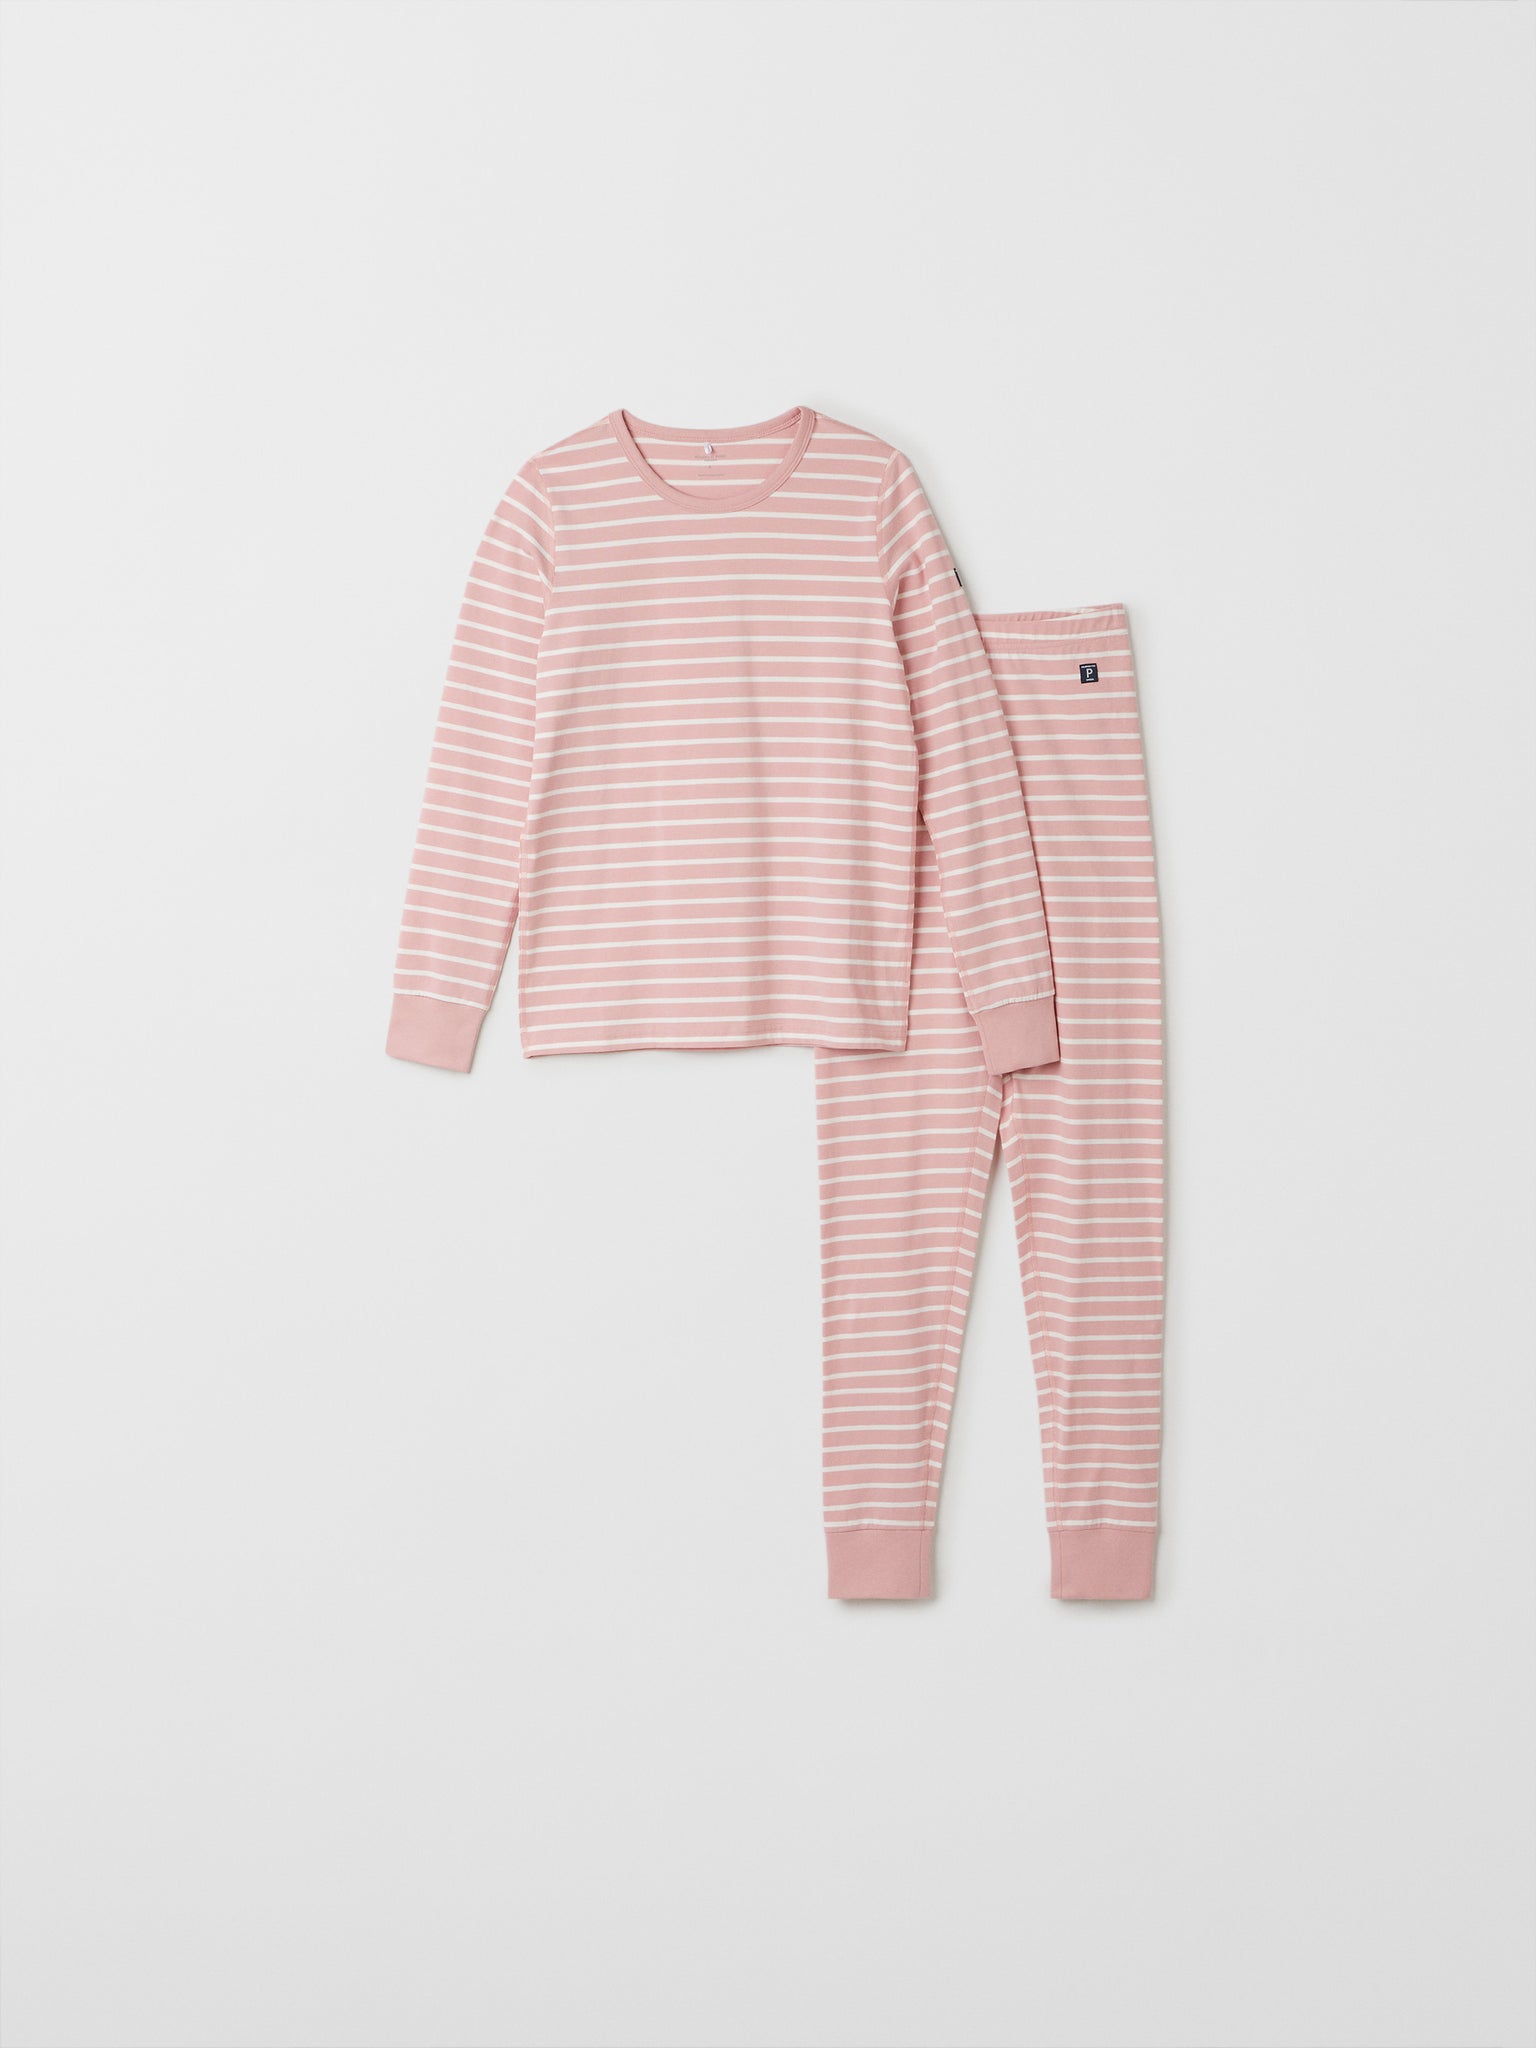 Organic Cotton Pink Adult Pyjamas from the Polarn O. Pyret adult collection. Made using 100% GOTS Organic Cotton